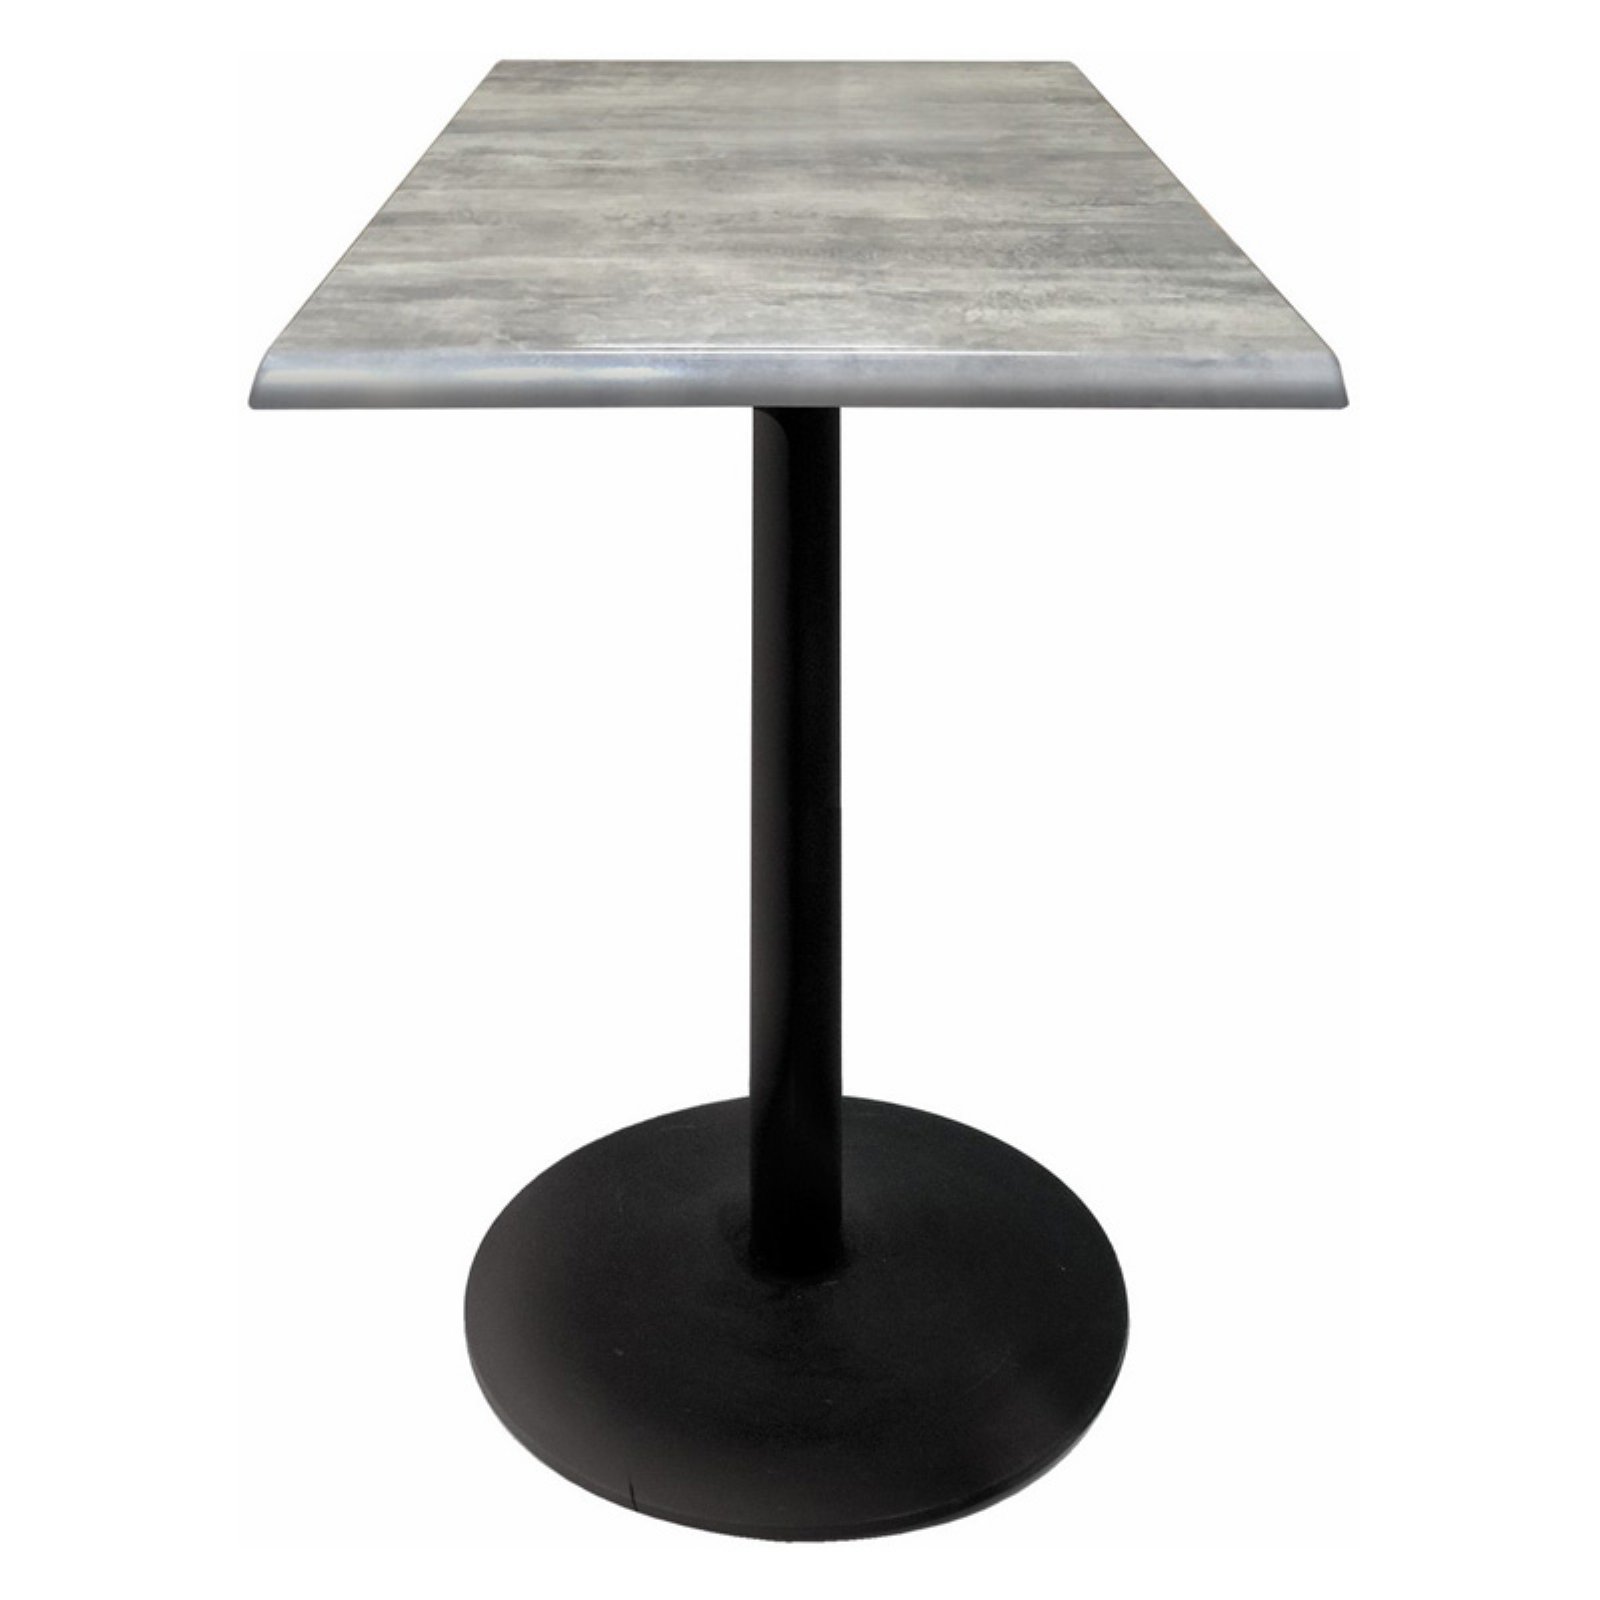 Indoor/Outdoor 30" Tall OD214 Black Table Base with 22" Diameter Foot and 36" x 36" Square Indoor/Outdoor Rustic Top by the Holland Bar Stool Co. - image 2 of 5